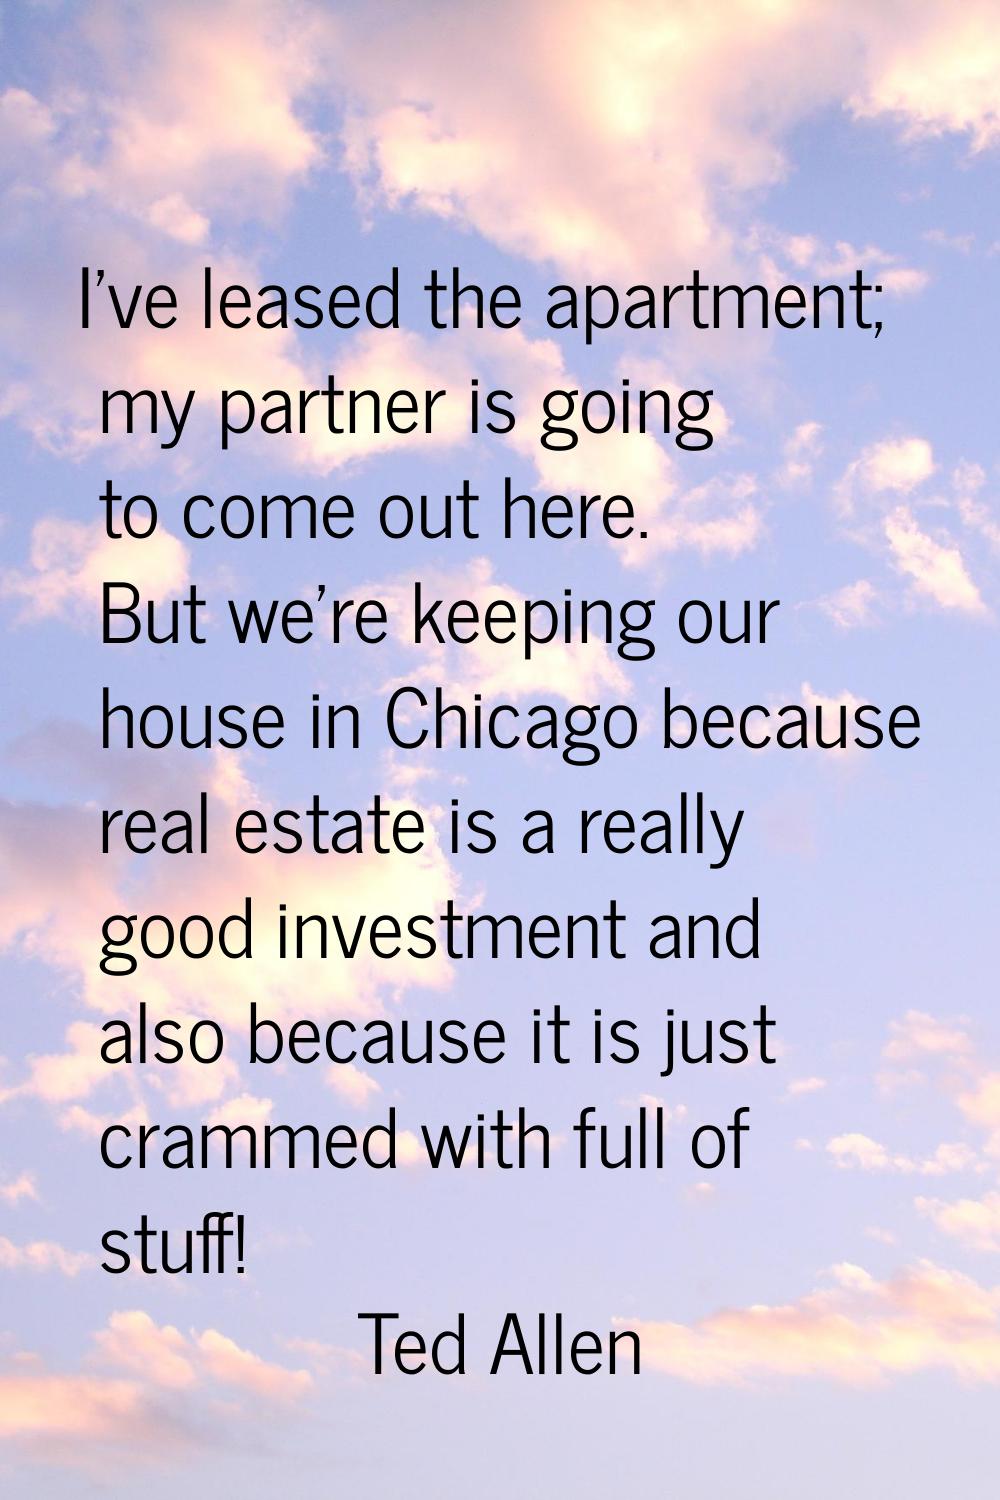 I've leased the apartment; my partner is going to come out here. But we're keeping our house in Chi